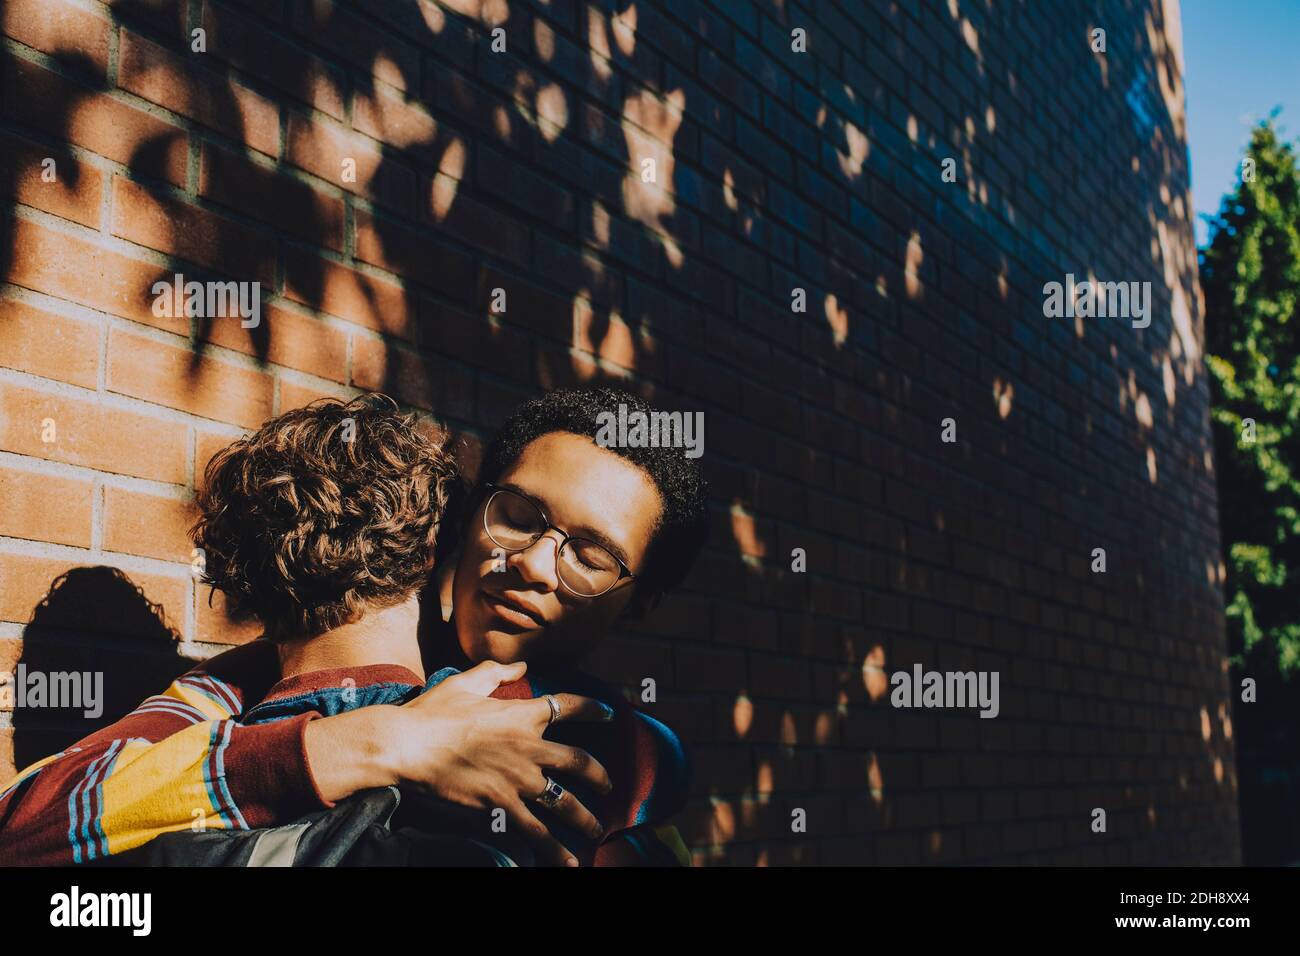 Teenager consoling friend while embracing against brick wall Stock Photo